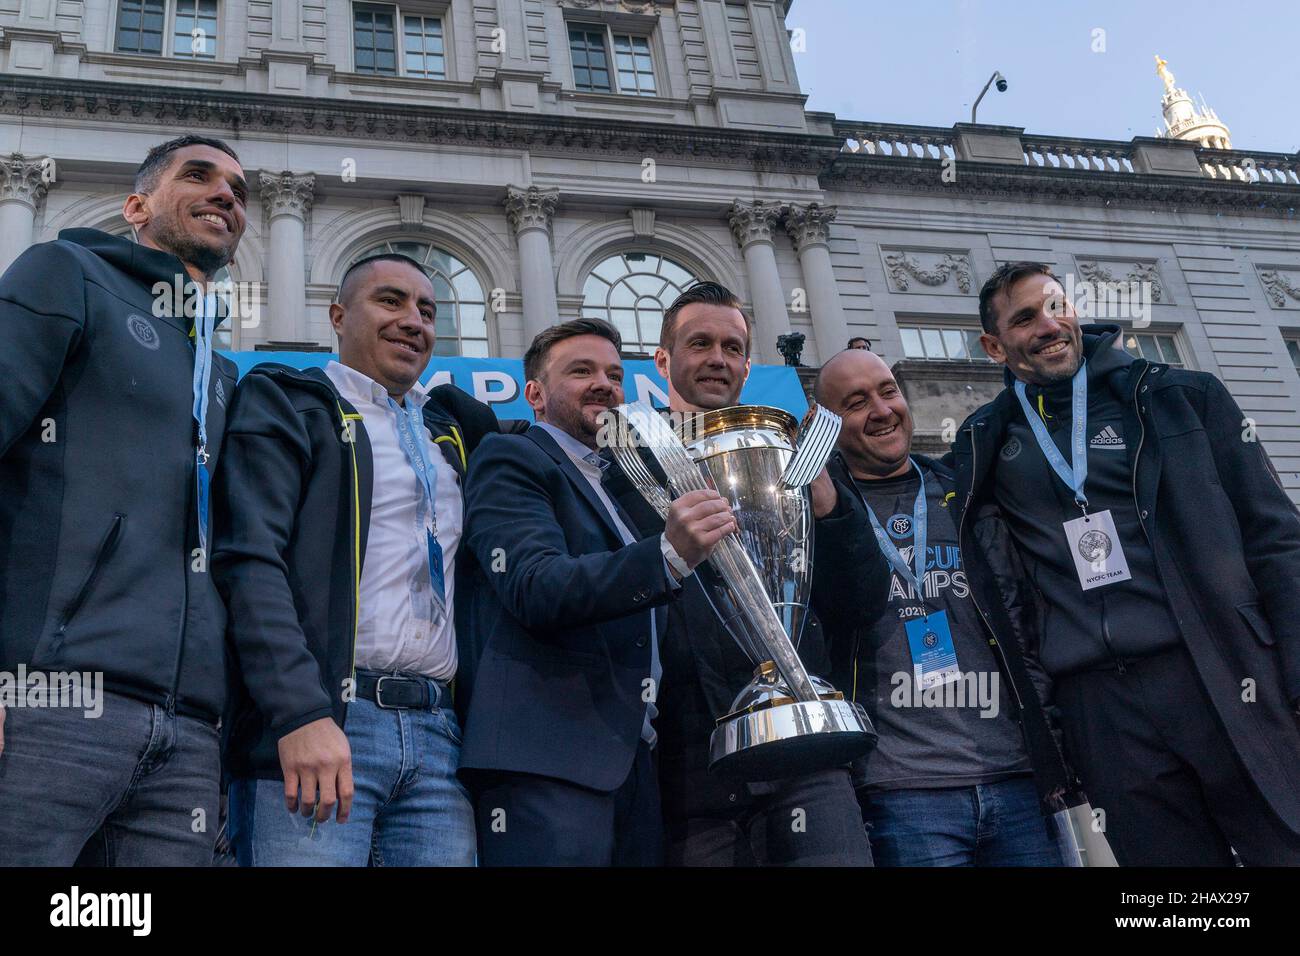 Coaching team with MLS Cup poses during celebration for NYCFC winning the 2021 MLS Cup on City Hall steps. NYCFC finished the regular season in 4th place and played almost all playoff games away. Winning the MLS Cup is the first trophy won by the franchise since it was established 7 years ago. NYCFC is part of the City Football Group which owns football clubs around the world. Sean Johnson was named MVP of the playofffs. Head coach Ronny Deila stands 3rd from right. (Photo by Lev Radin/Pacific Press) Stock Photo